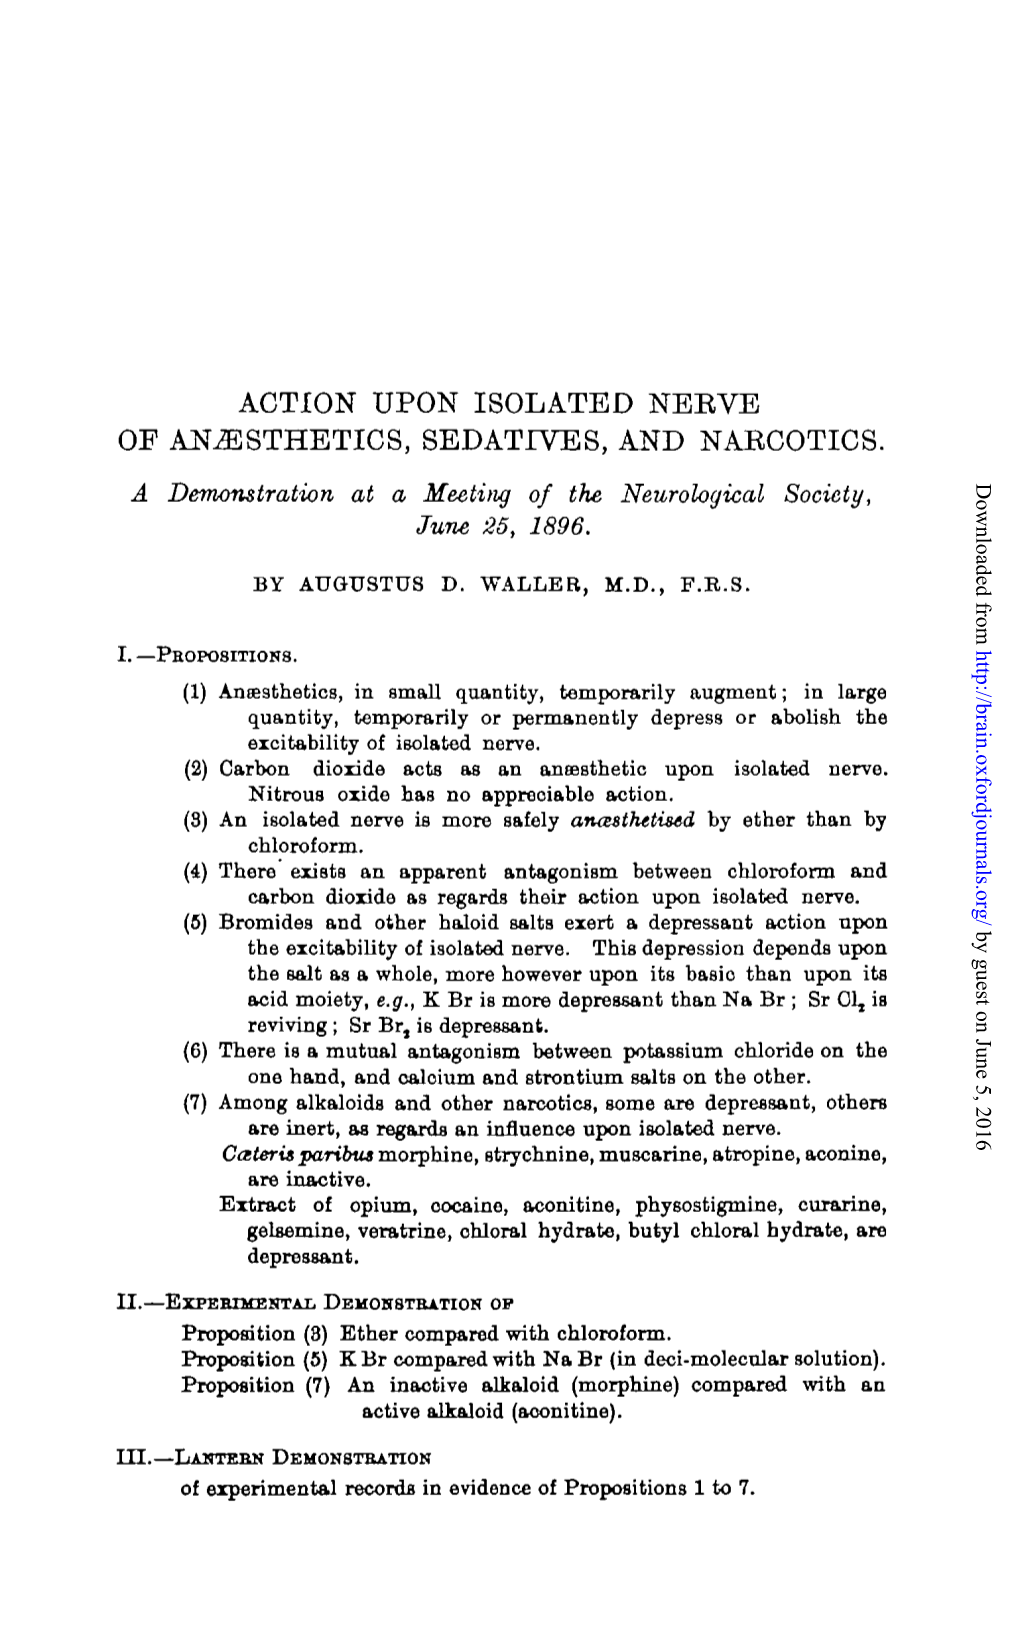 Action Upon Isolated Neeve of Anesthetics, Sedatives, and Narcotics